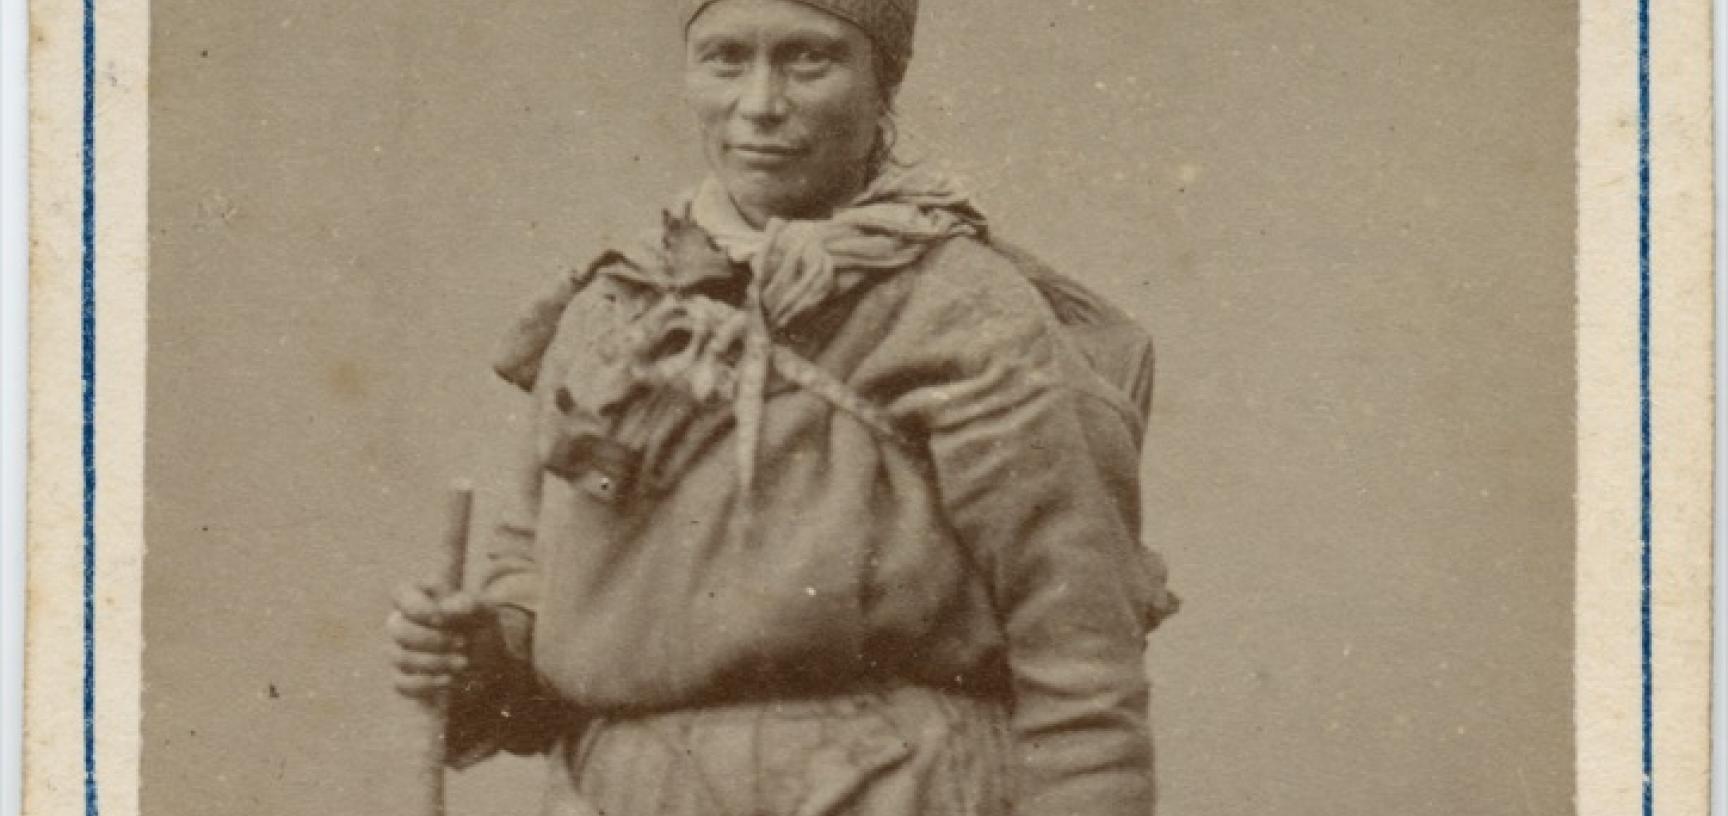 Studio portrait of a Saami woman, standing, holding a bag. Photograph by the Jørgen Wickstrøm studio. Tromsø, Norway. Circa 1870s. (Copyright Pitt Rivers Museum, University of Oxford. Accession Number: 1941.8.47)